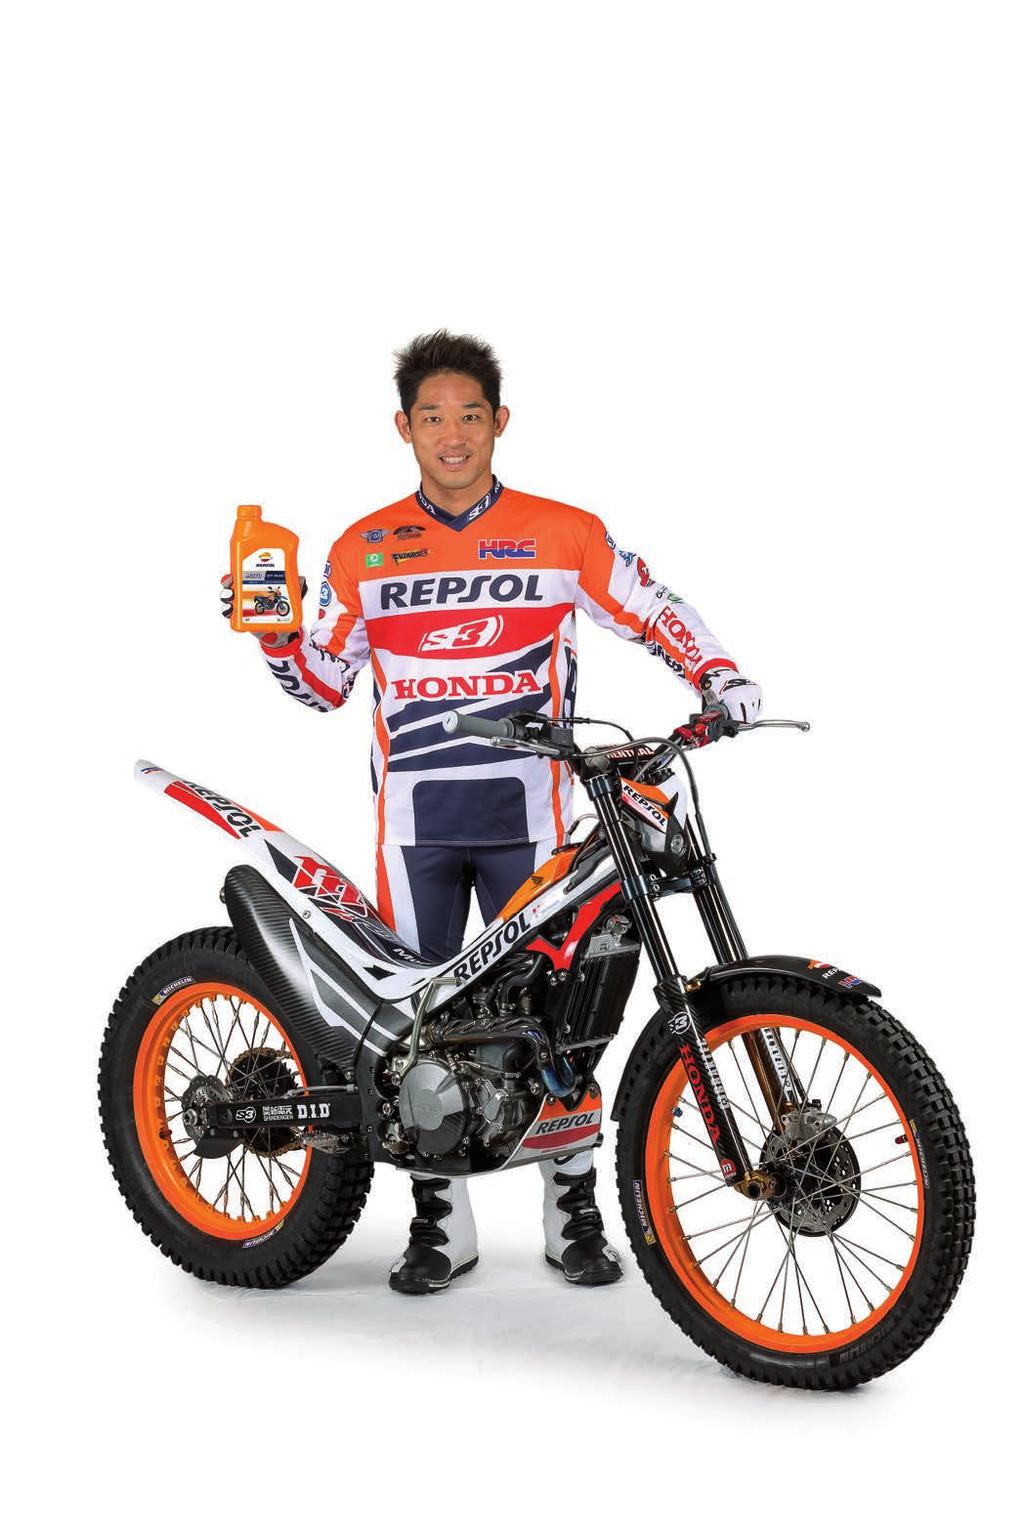 REPSOL MOTO OFF ROAD 4T 10W-40 API SN JASO T903:2016 JASO This synthetic lubricating oil for high-performance four-stroke engines is recommended for all sorts of oﬀ-road motorcycles, including trial,